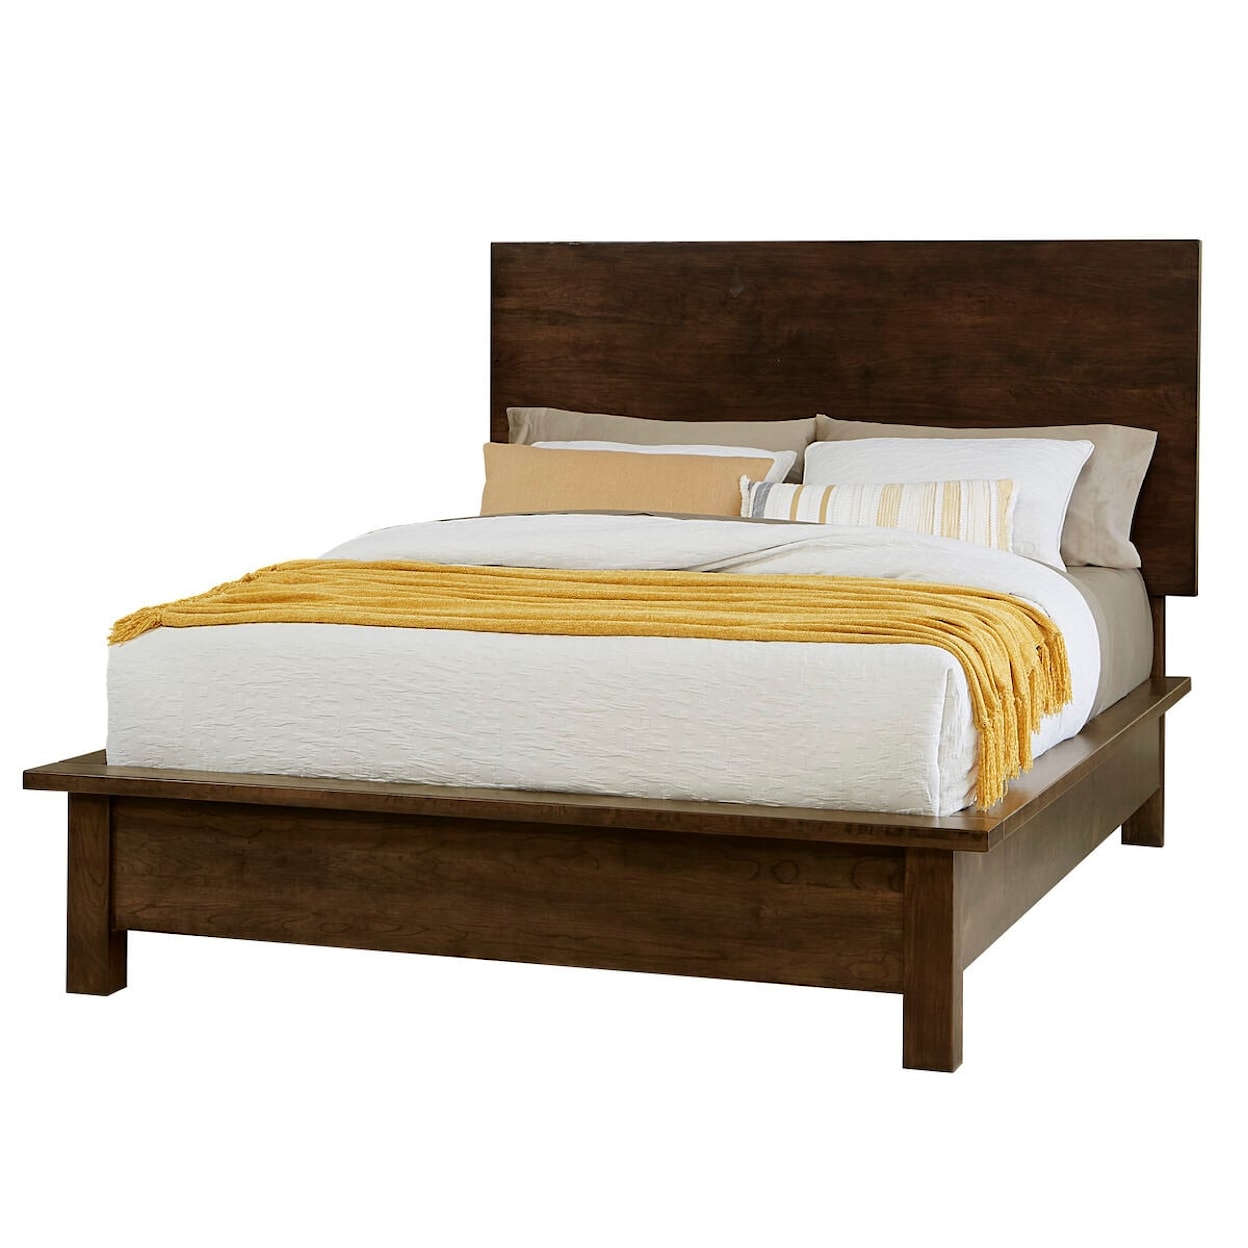 Artisan & Post Crafted Cherry King Terrace Bedroom Set